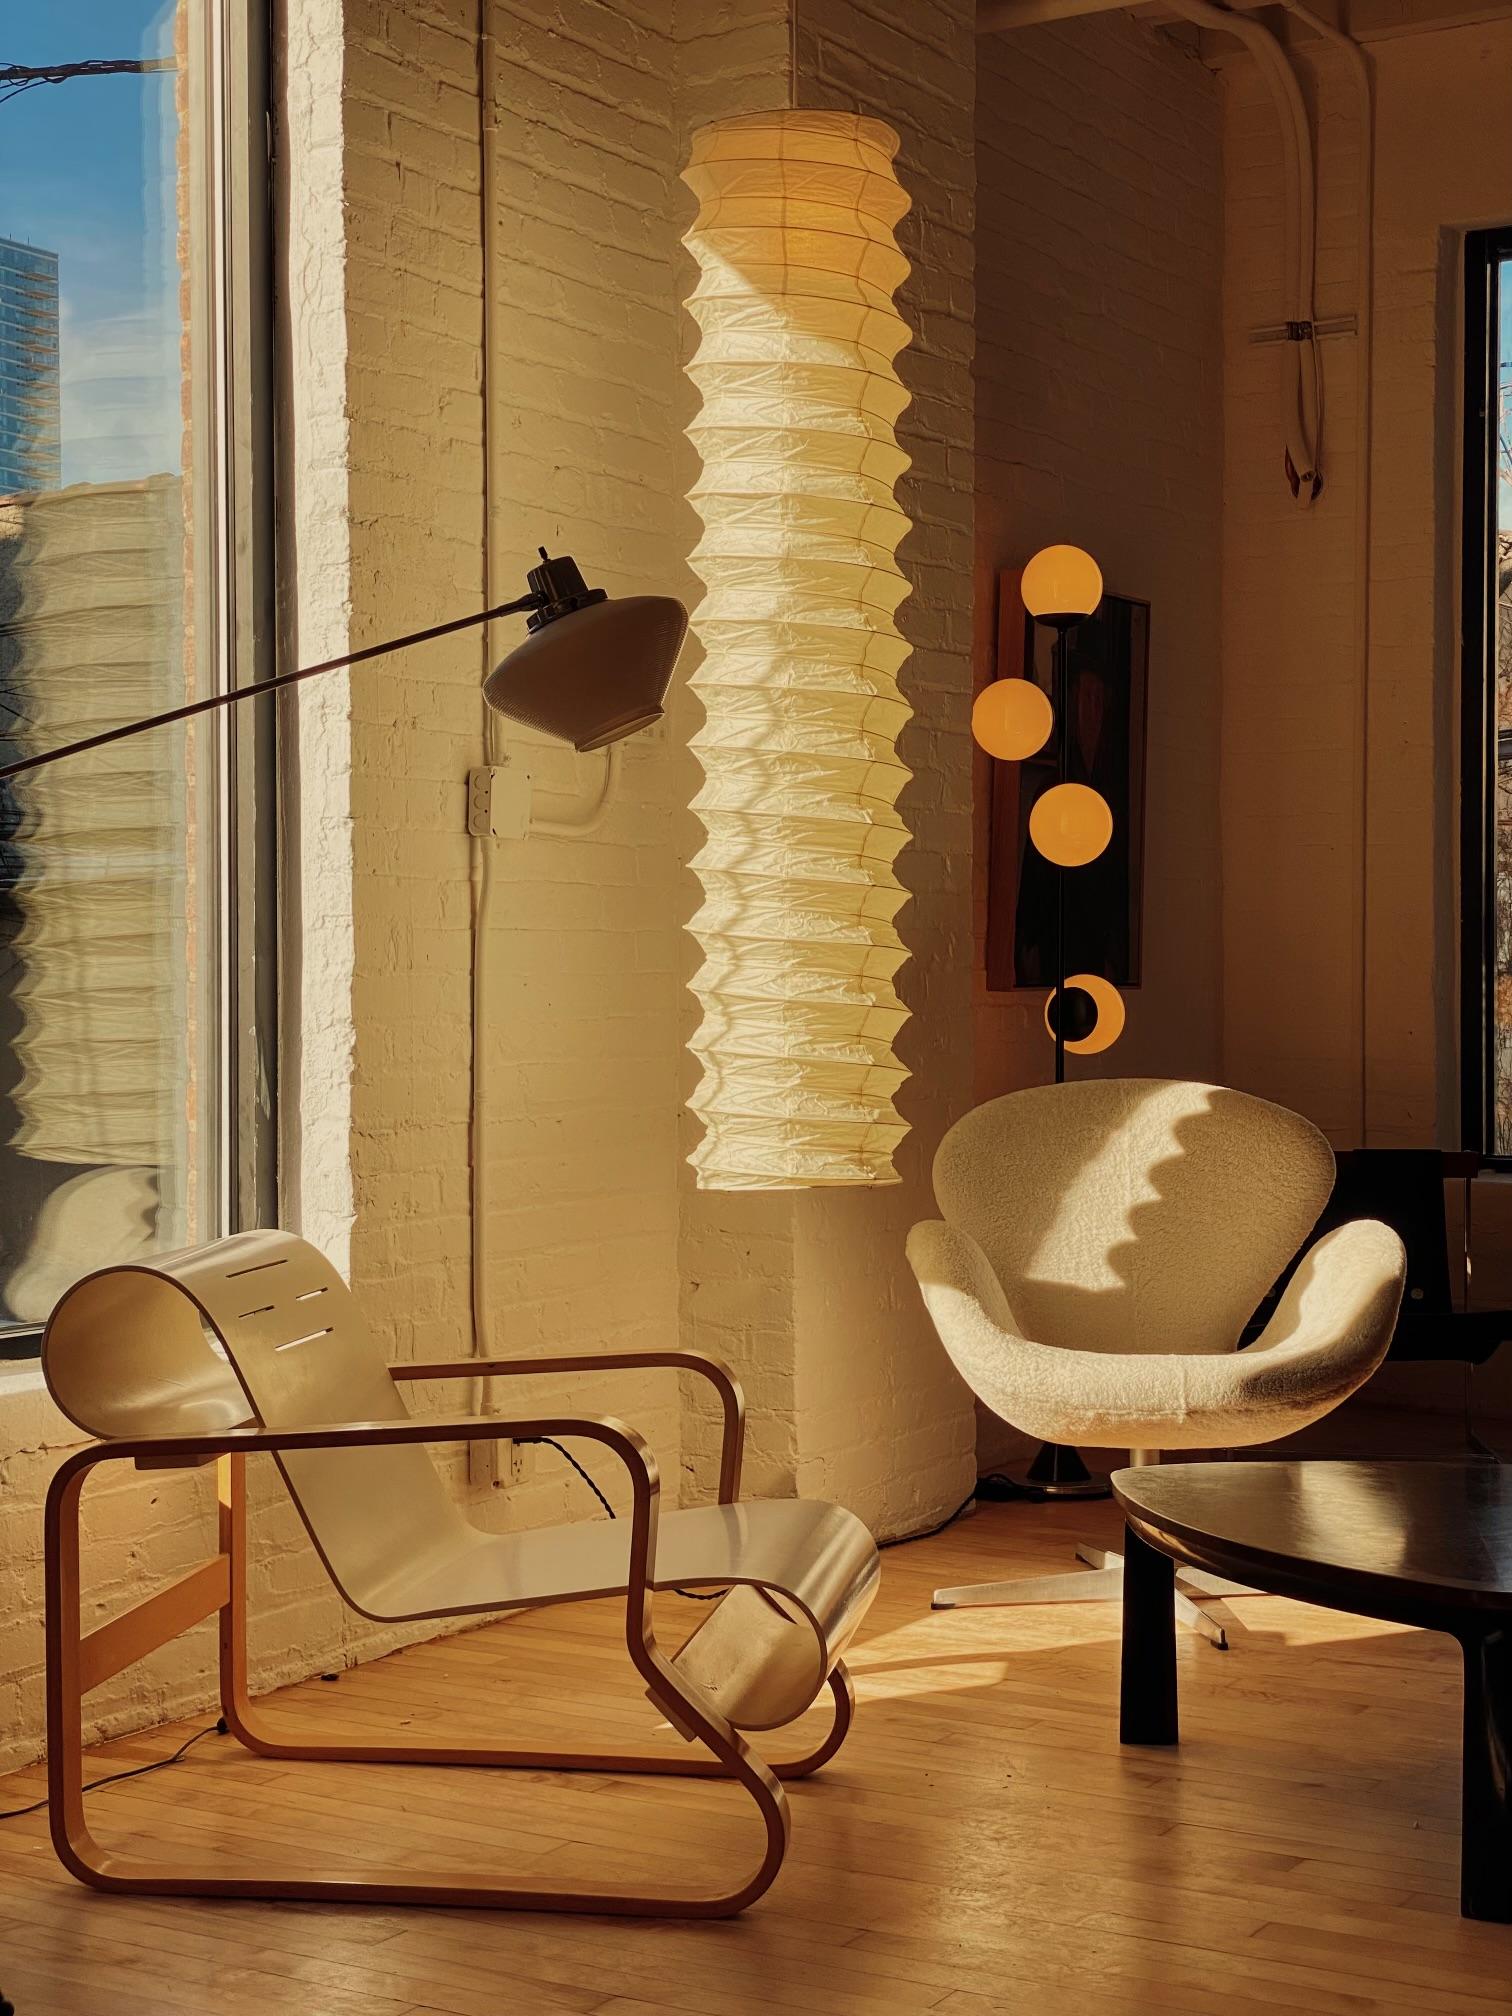 Paimio Chair by Alvar Aalto, an authentic edition, chair #41, designed in 1941 by Alvar Aalto for Artek of Finland. A tour de force in bentwood it tested the limits of plywood manufacturing in the early 1930s.